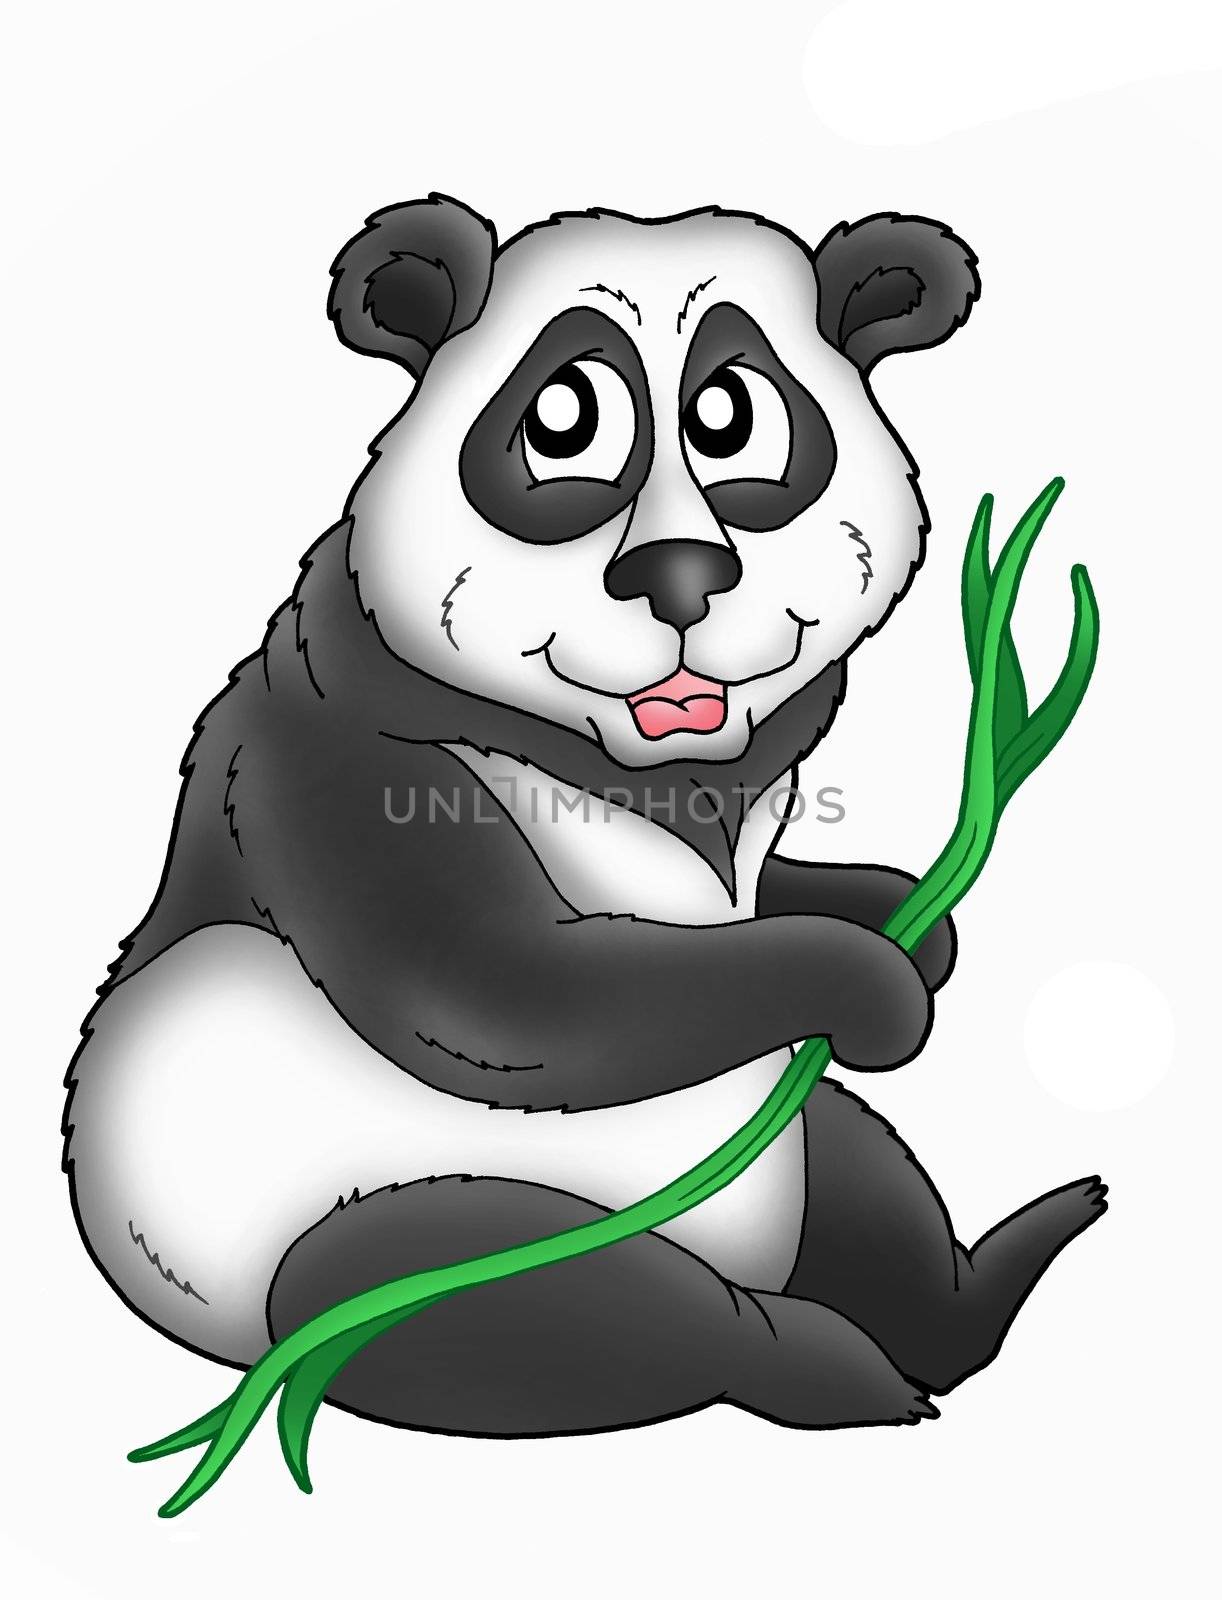 Panda by clairev